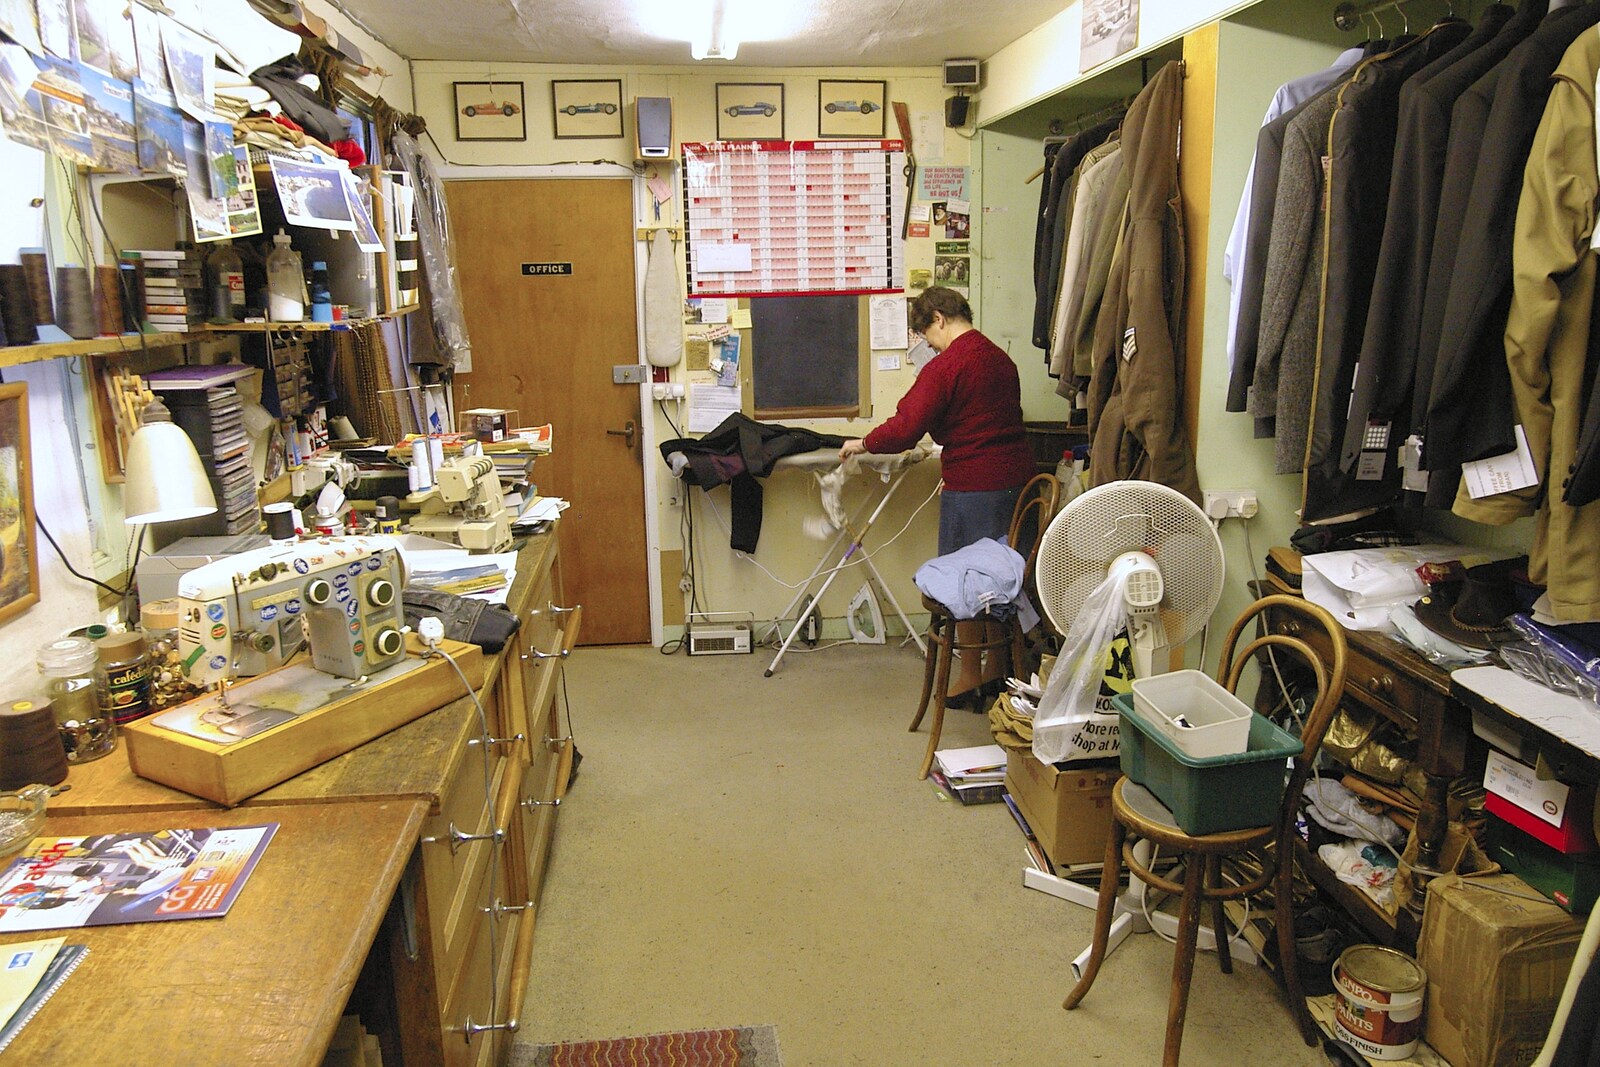 Some ironing is done from A Portrait of Hopgoods: Gentlemen's Outfitters, Diss, Norfolk - 4th January 2006